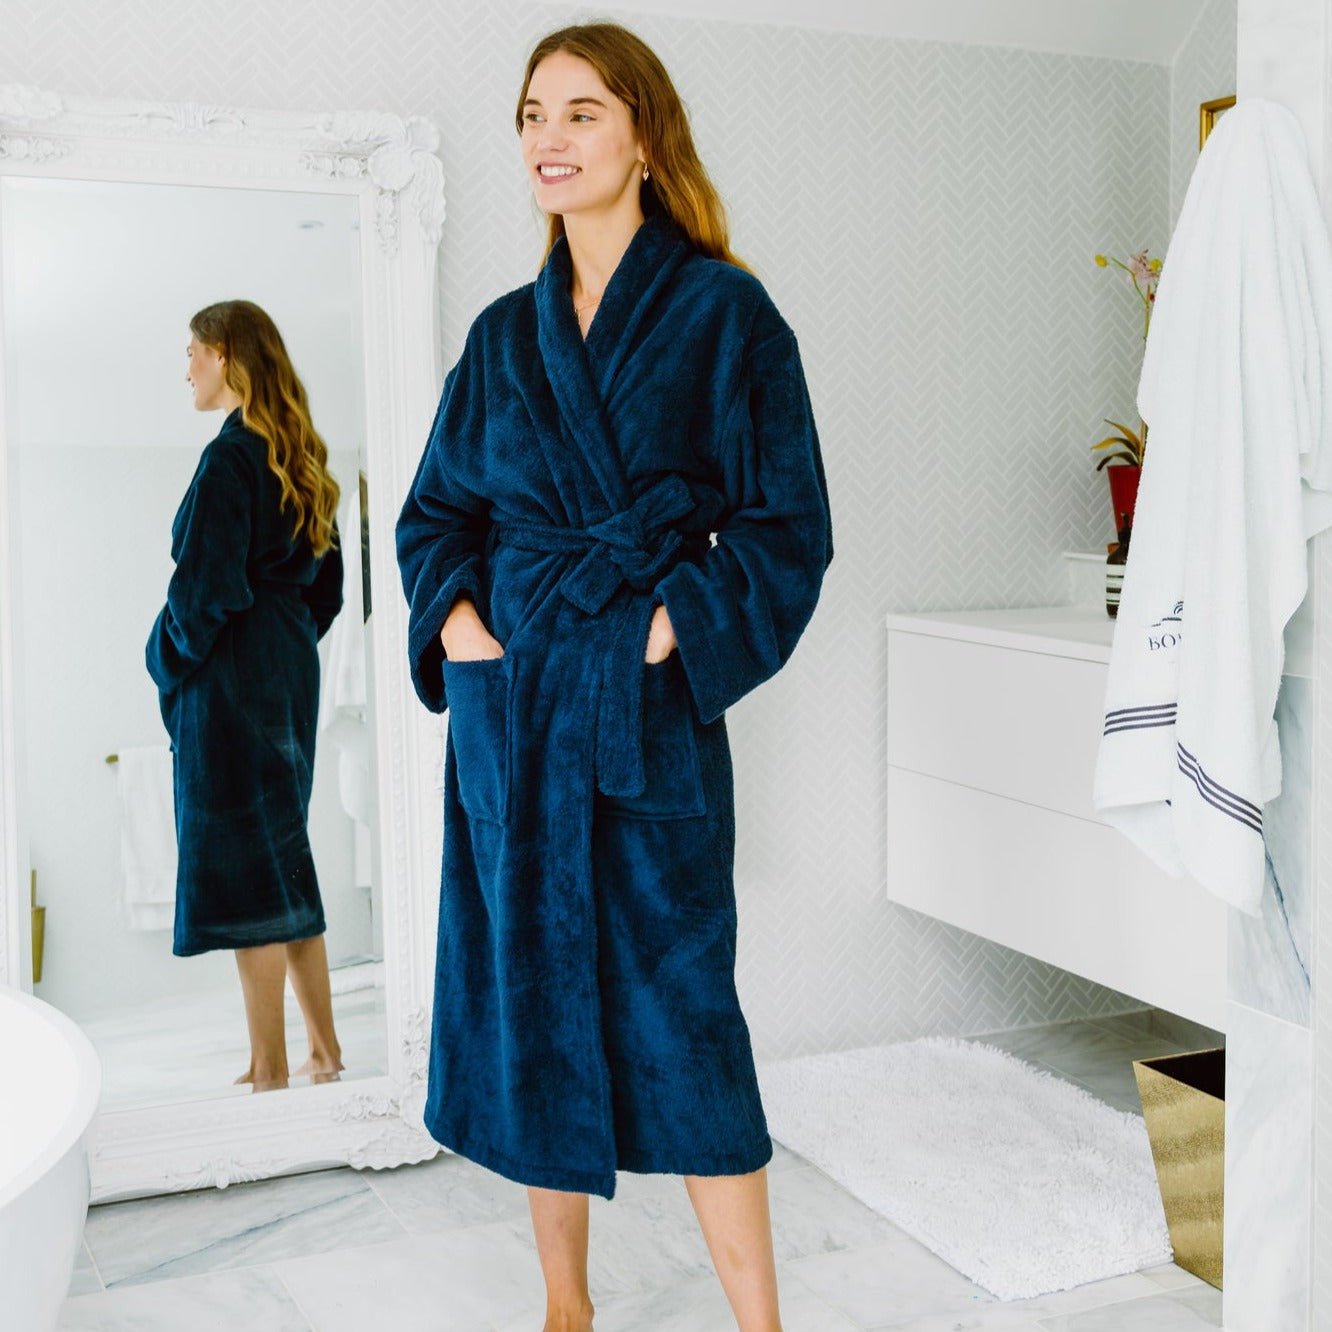 Designer Dressing Gowns & Robes for Women - Shop Now on FARFETCH